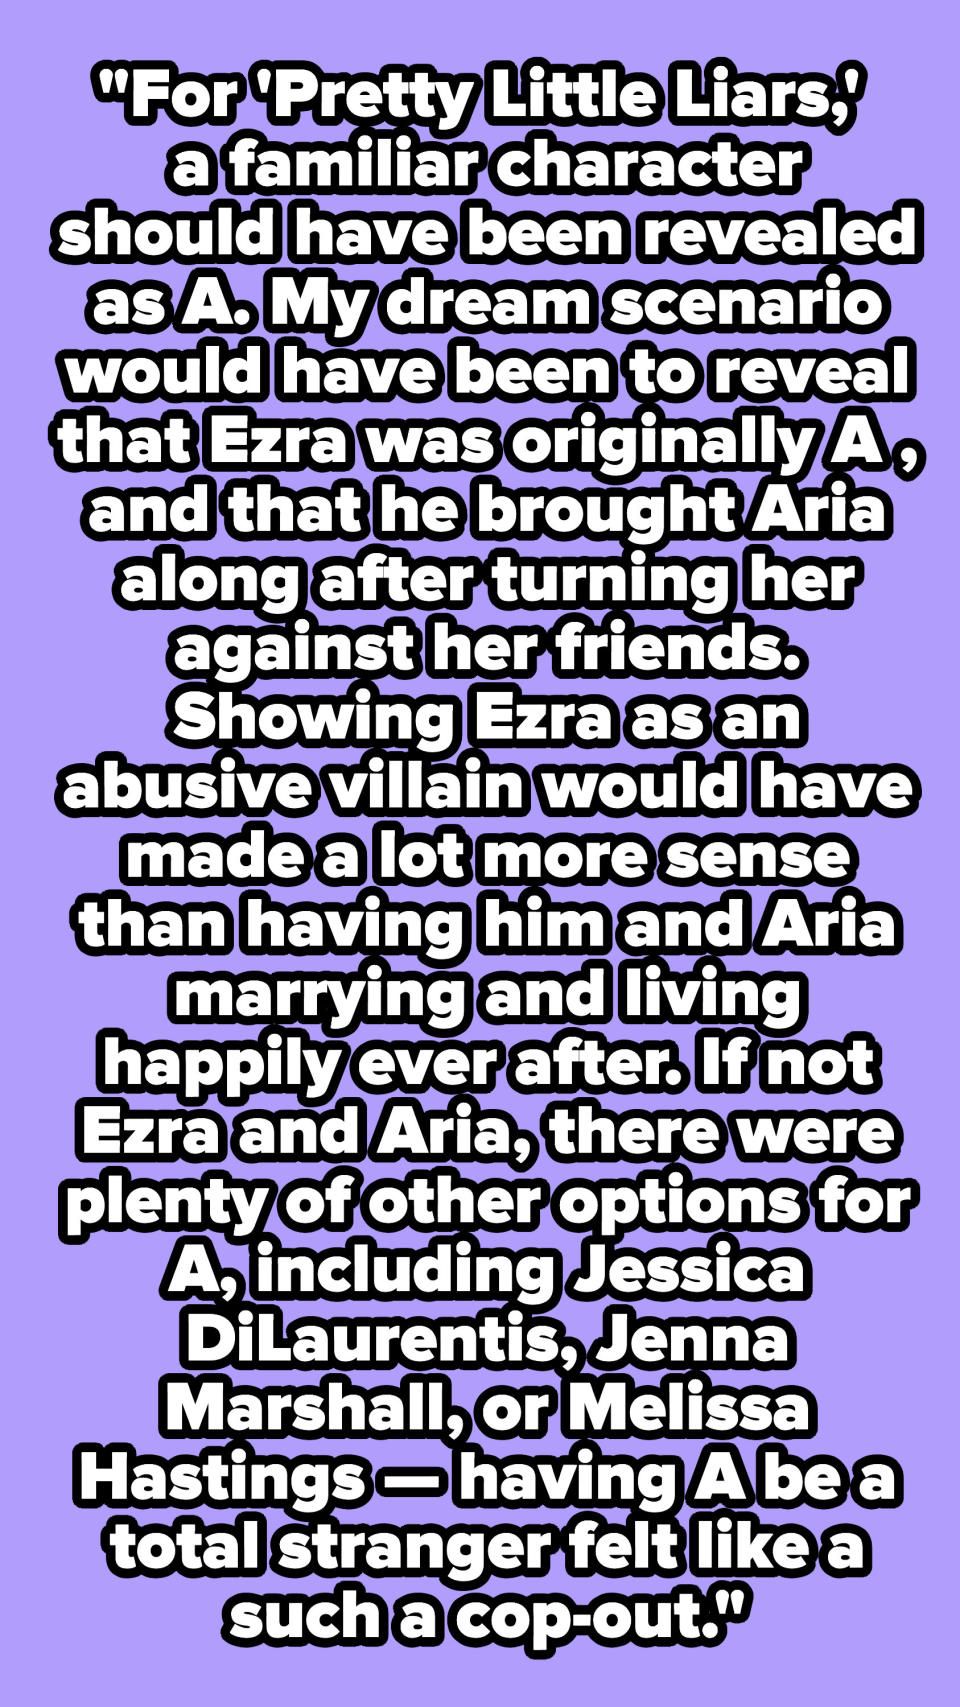 "For 'Pretty Little Liars,' a familiar character should have been revealed as A. My dream scenario would have been to reveal that Ezra was originally A."